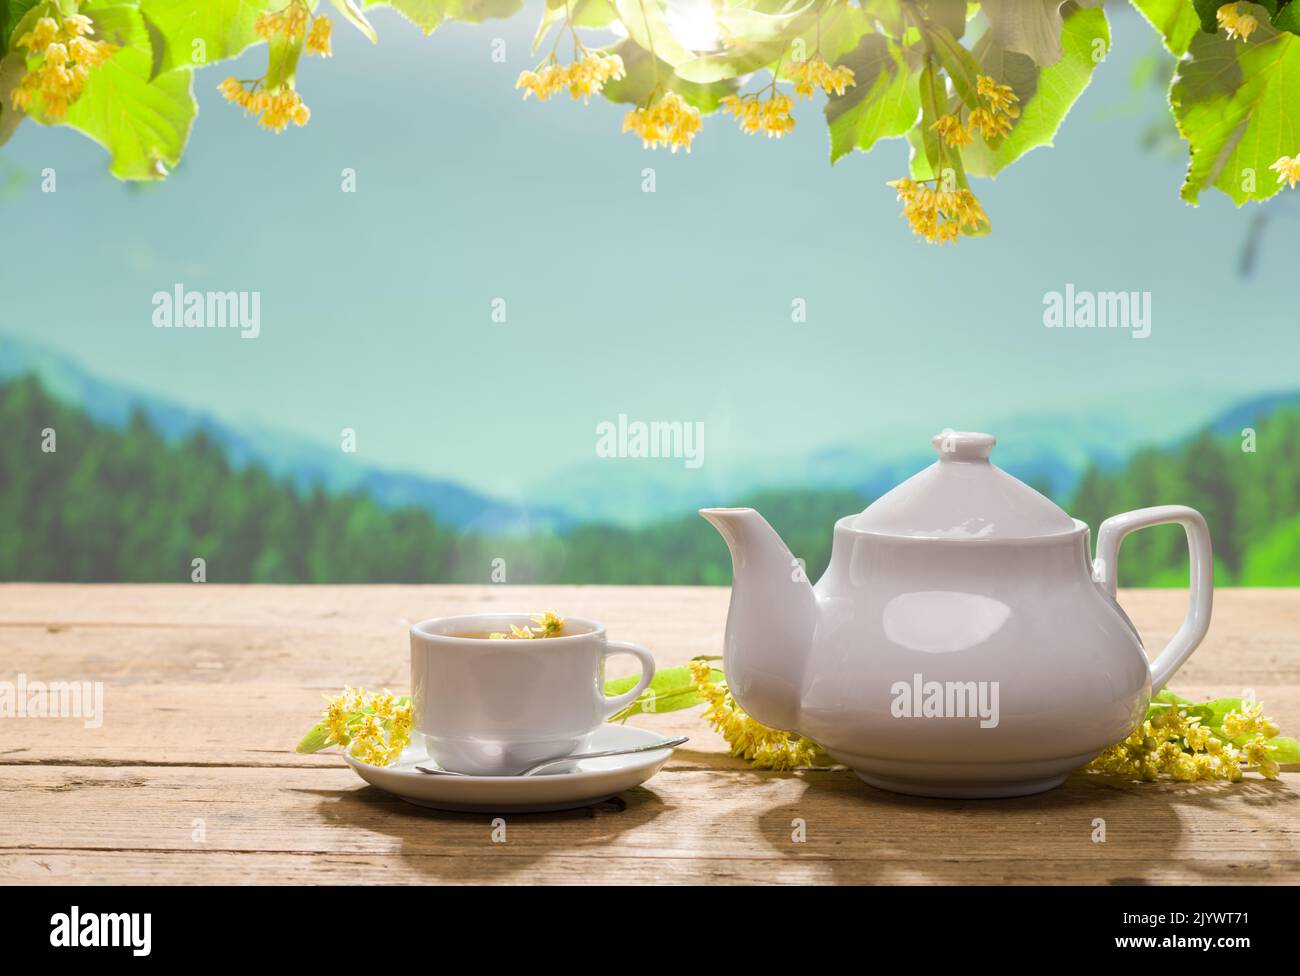 Linden tea on the garden table. Teapot and cup on wooden table. Linden flowers and hot lime tea. Herbal teas concept. Stock Photo